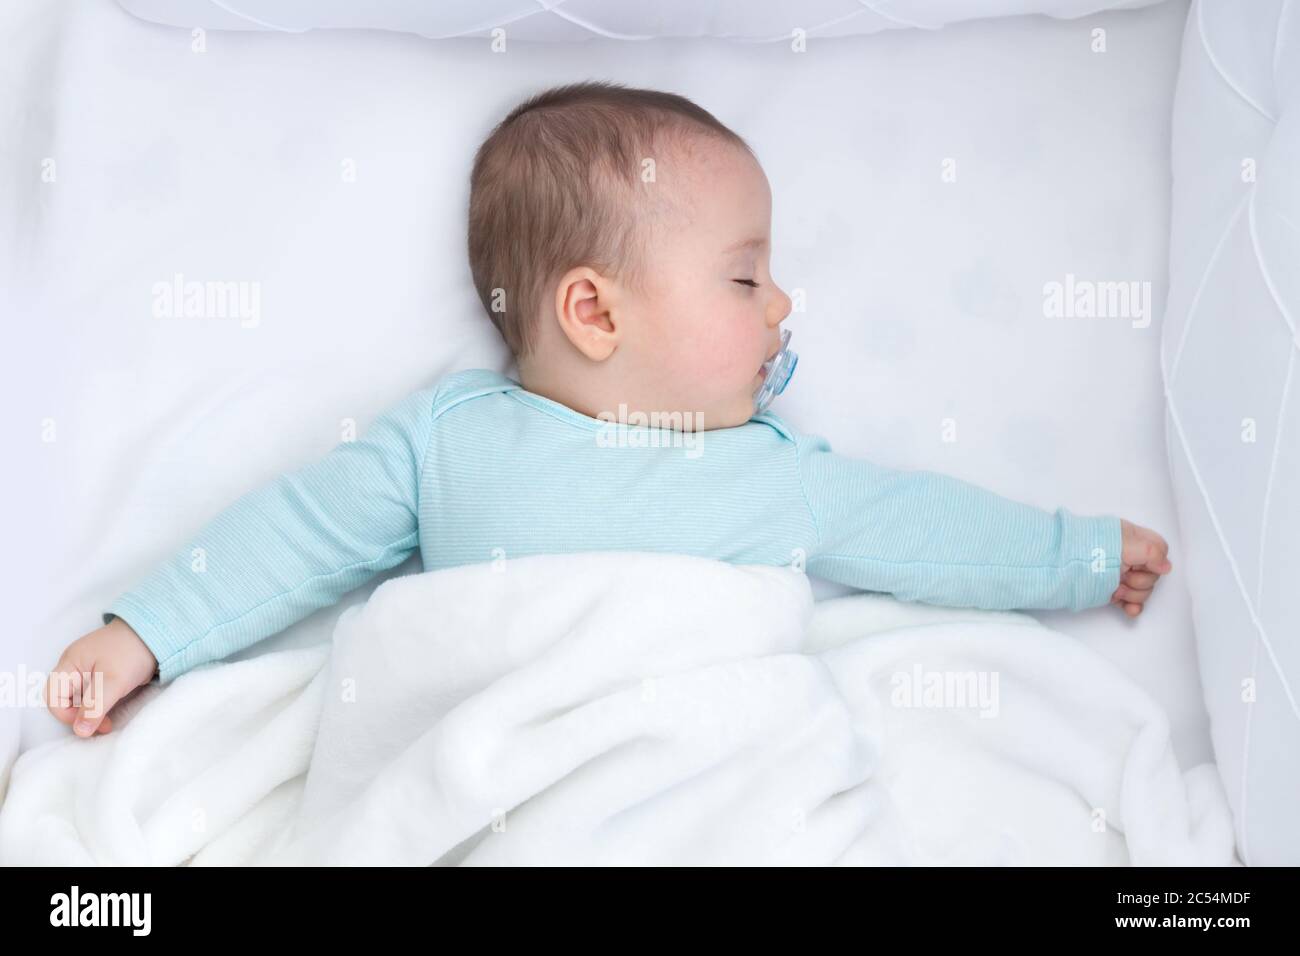 Baby boy sleeping with open arms in a cradle . Light blue pajama and white bed sheets. A pacifier in his mouth. Stock Photo